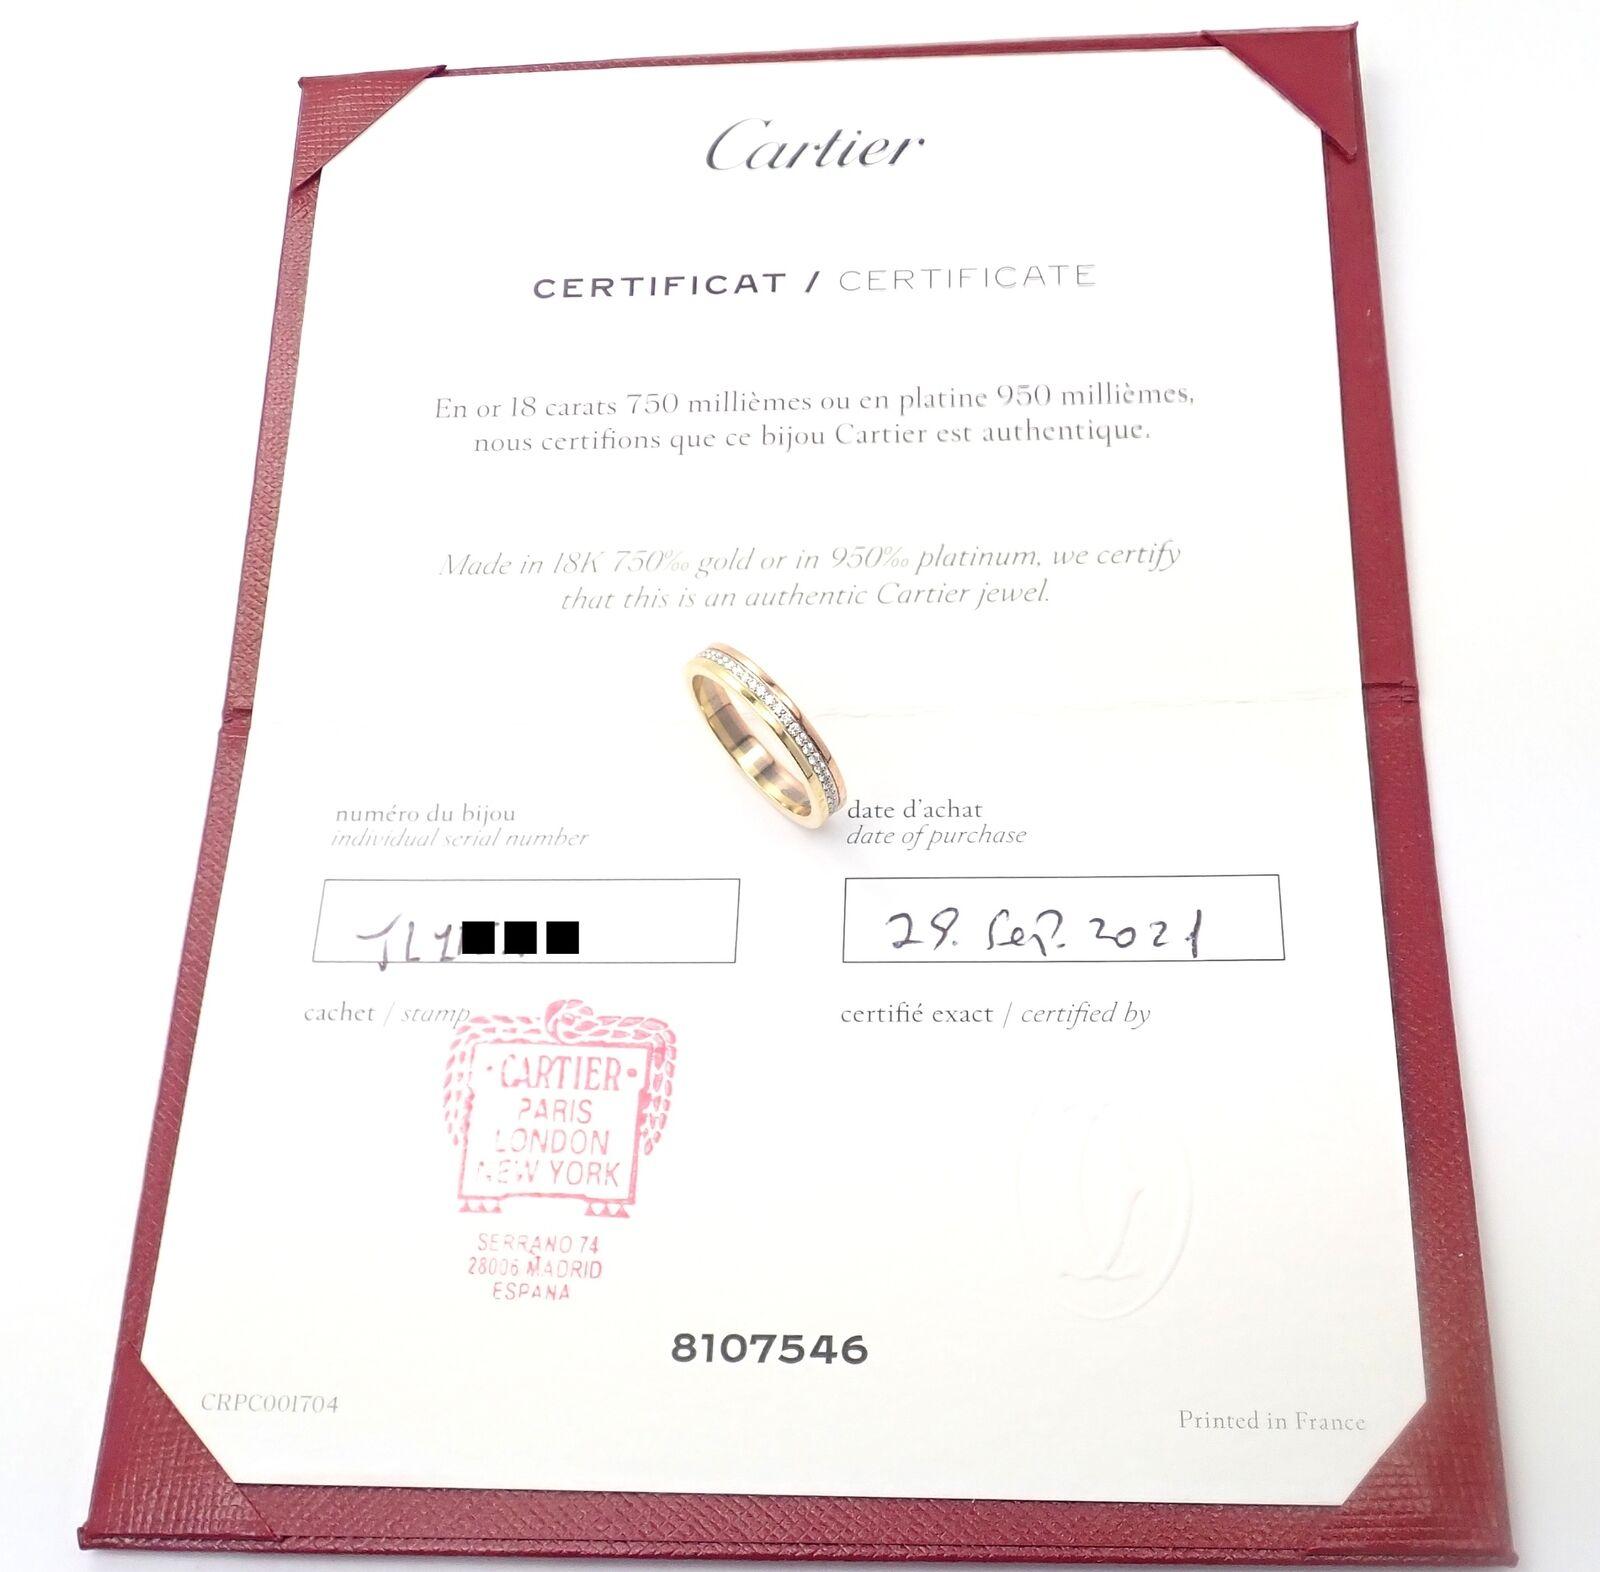 18k Tri-Color Gold (Yellow, White, Rose) Diamond Vendôme Louis Cartier Band Ring by Cartier. 
With 53 round brilliant cut diamonds VS1 clarity, G color total weight approx. .23ct
This ring comes with Cartier certificate of authenticity and a Cartier